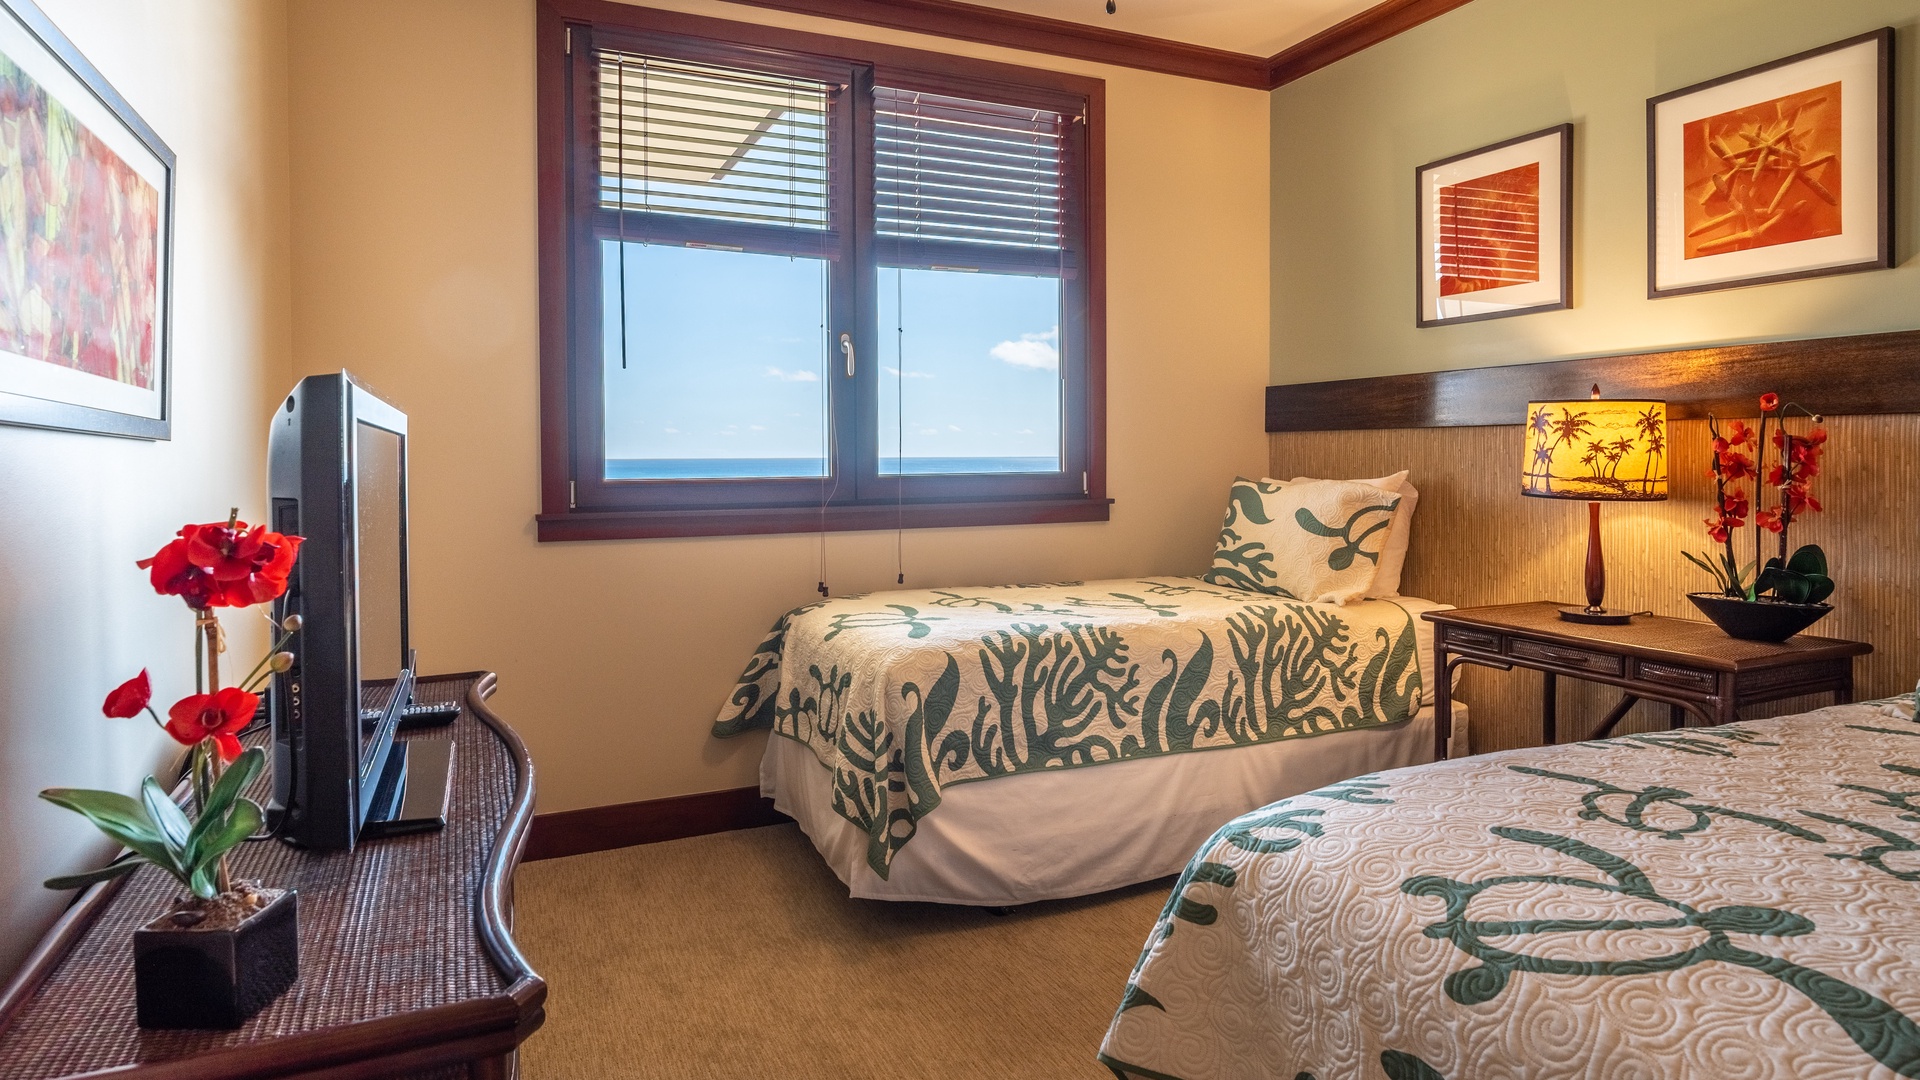 Kapolei Vacation Rentals, Ko Olina Beach Villas B901 - The twin beds can be converted in to a king for your convenience.